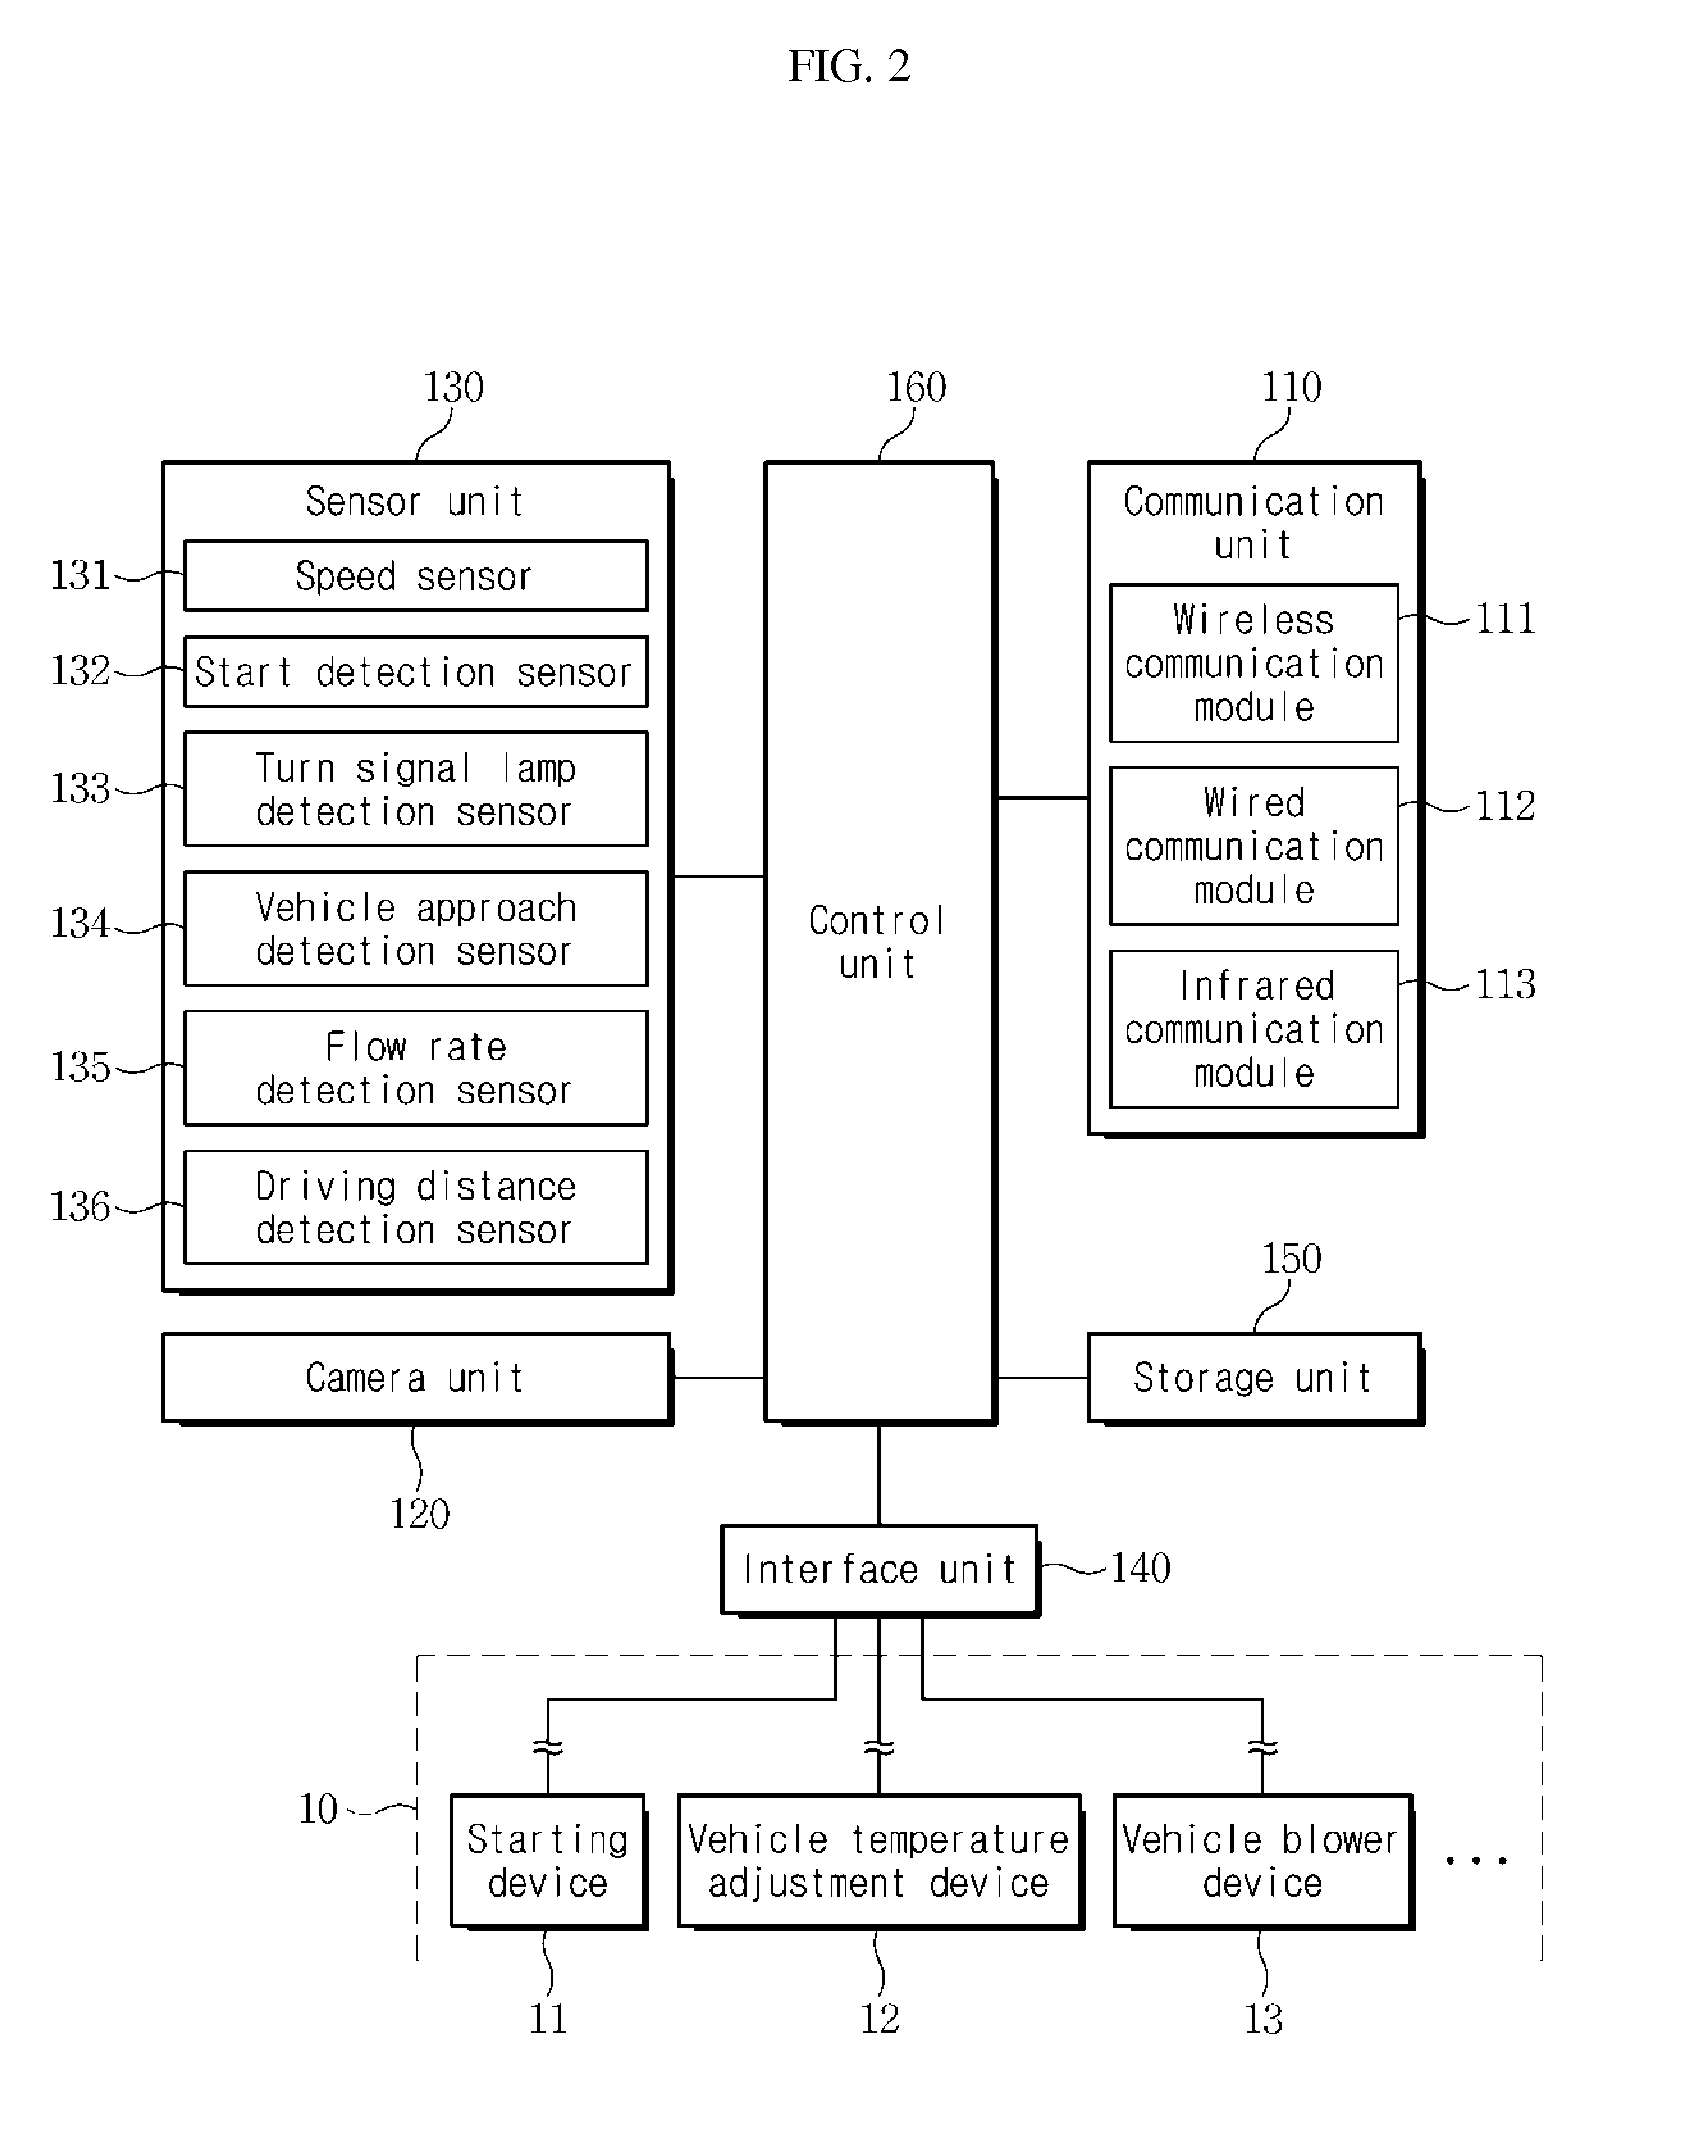 Apparatus and method for a telematics service